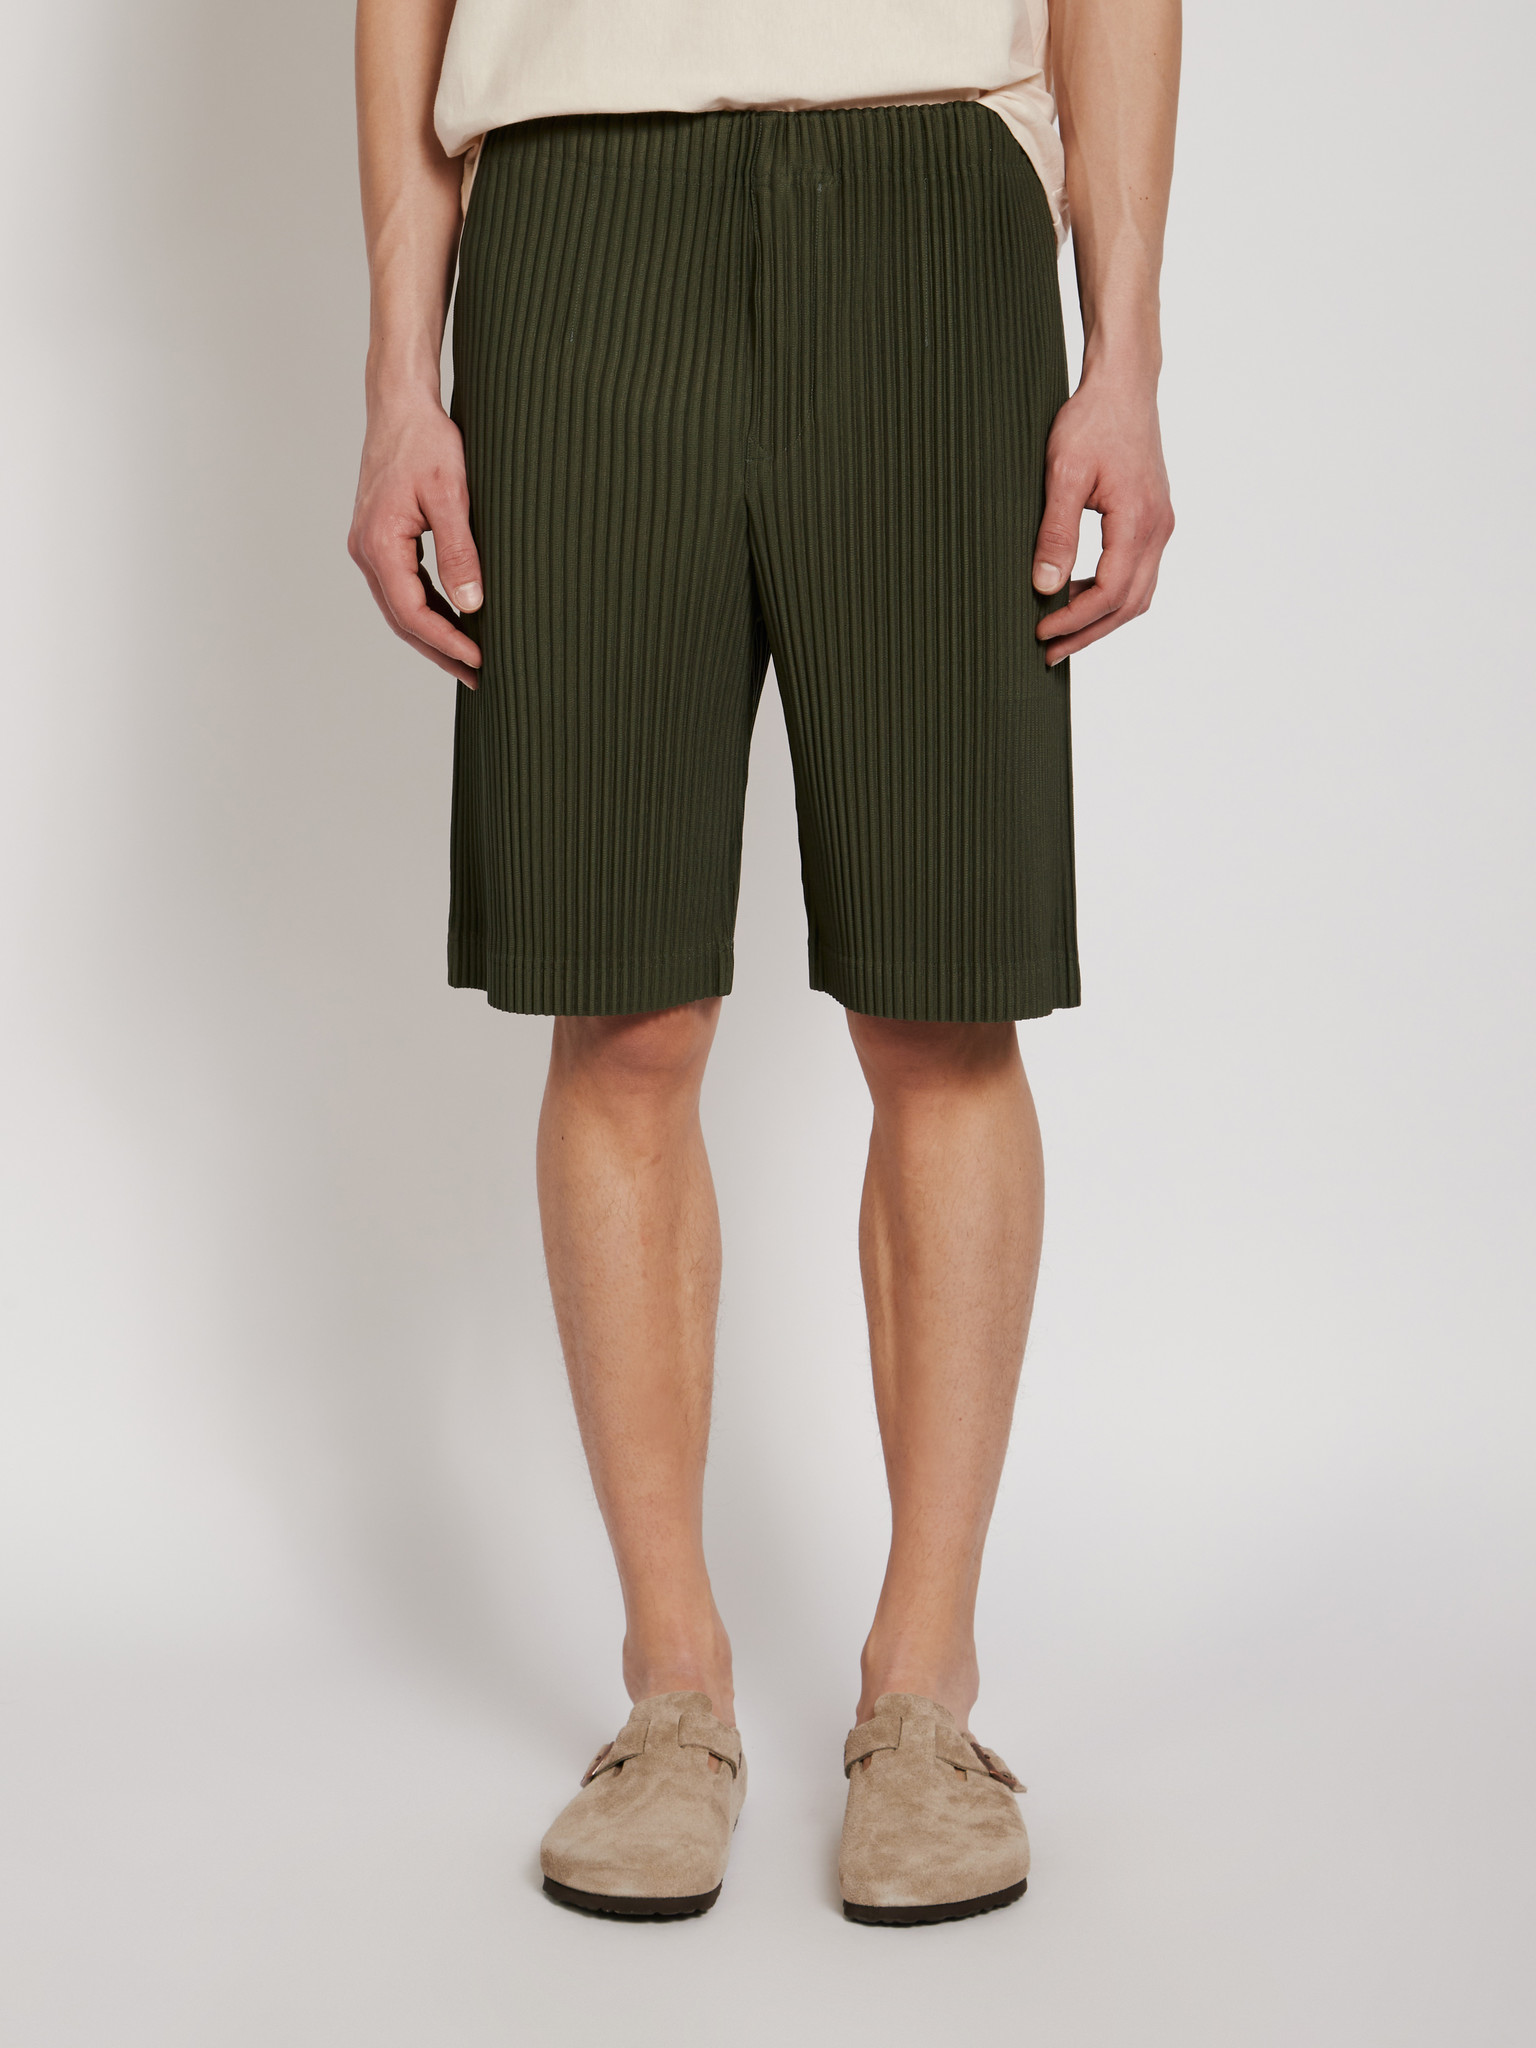 Homme plissé Issey Miyake: Green Pleated Shorts, Men's Designer Clothes